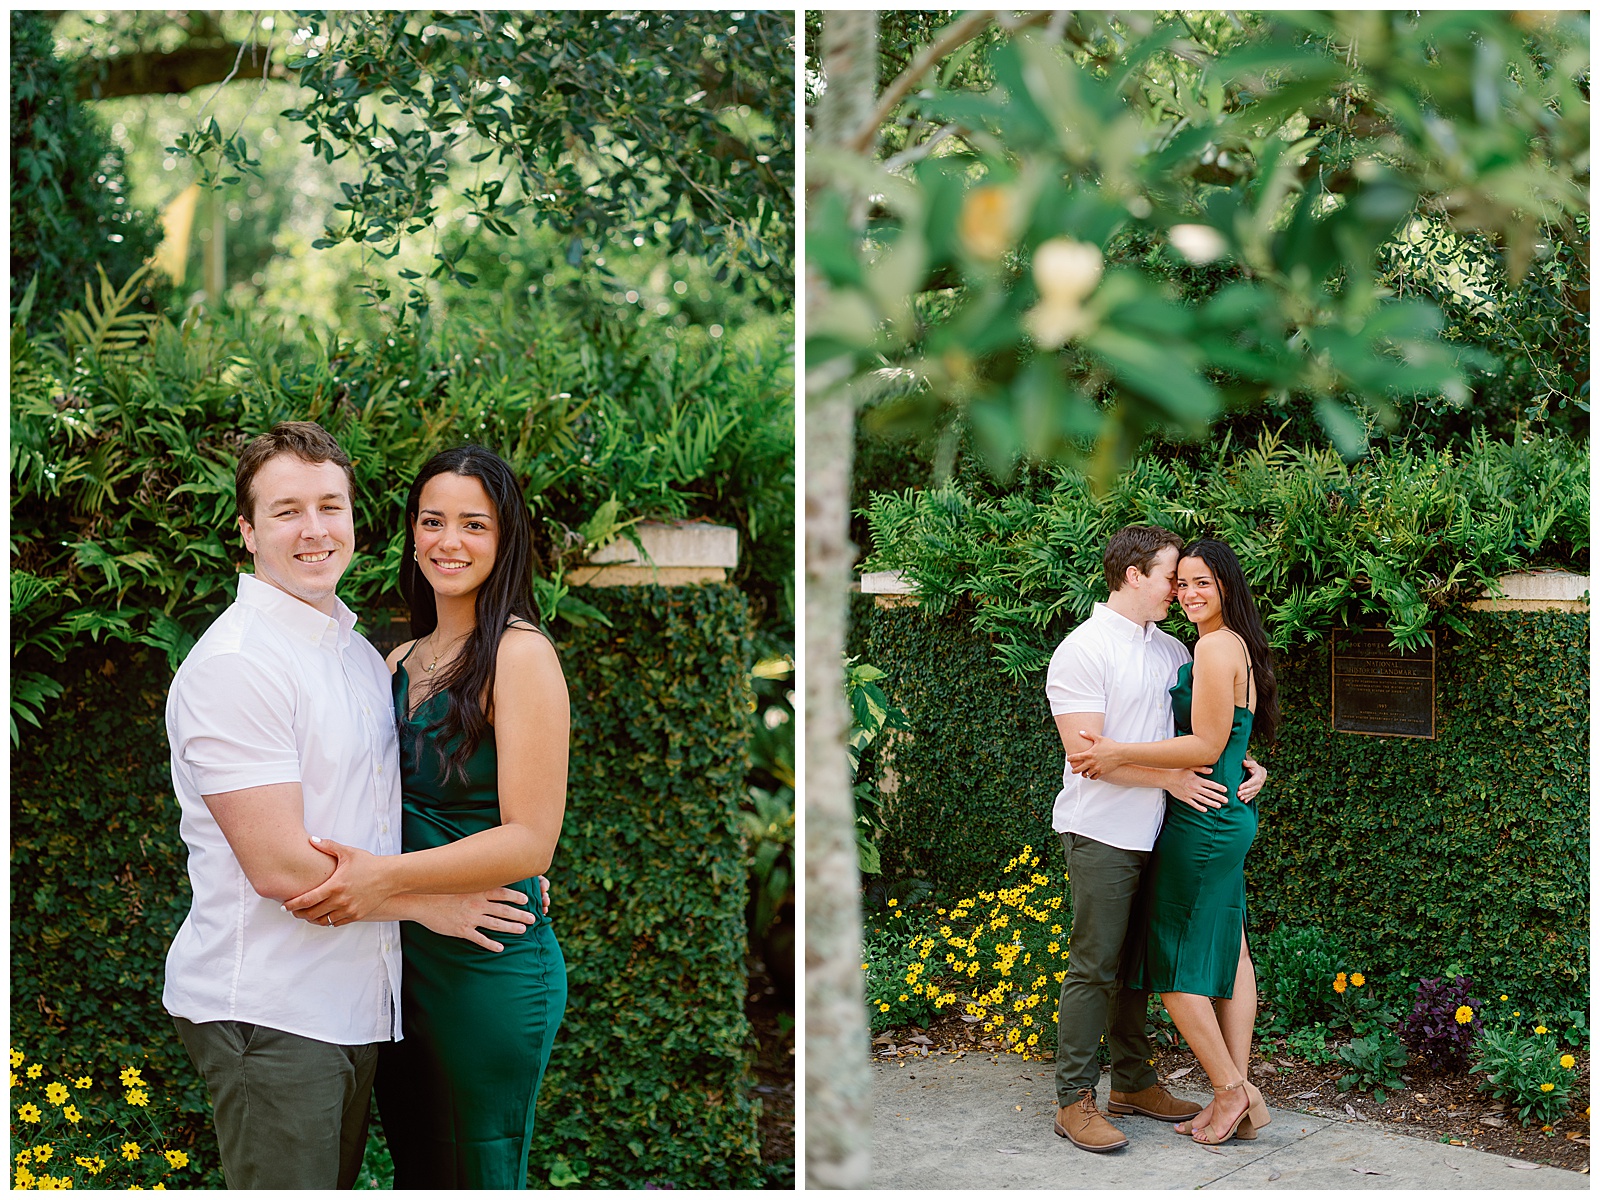 Bok Tower Garden, Bok Tower Garden Engagement Session, JCanelas Photography, Tampa Engagement Photographer, Tampa Engagement Session, Orlando Wedding Photographer, Orlando Engagement Photography, Central Florida Photographer, Garden Engagement Session, Engagement Session Poses, Silk Dress, Engagement Session Outfit